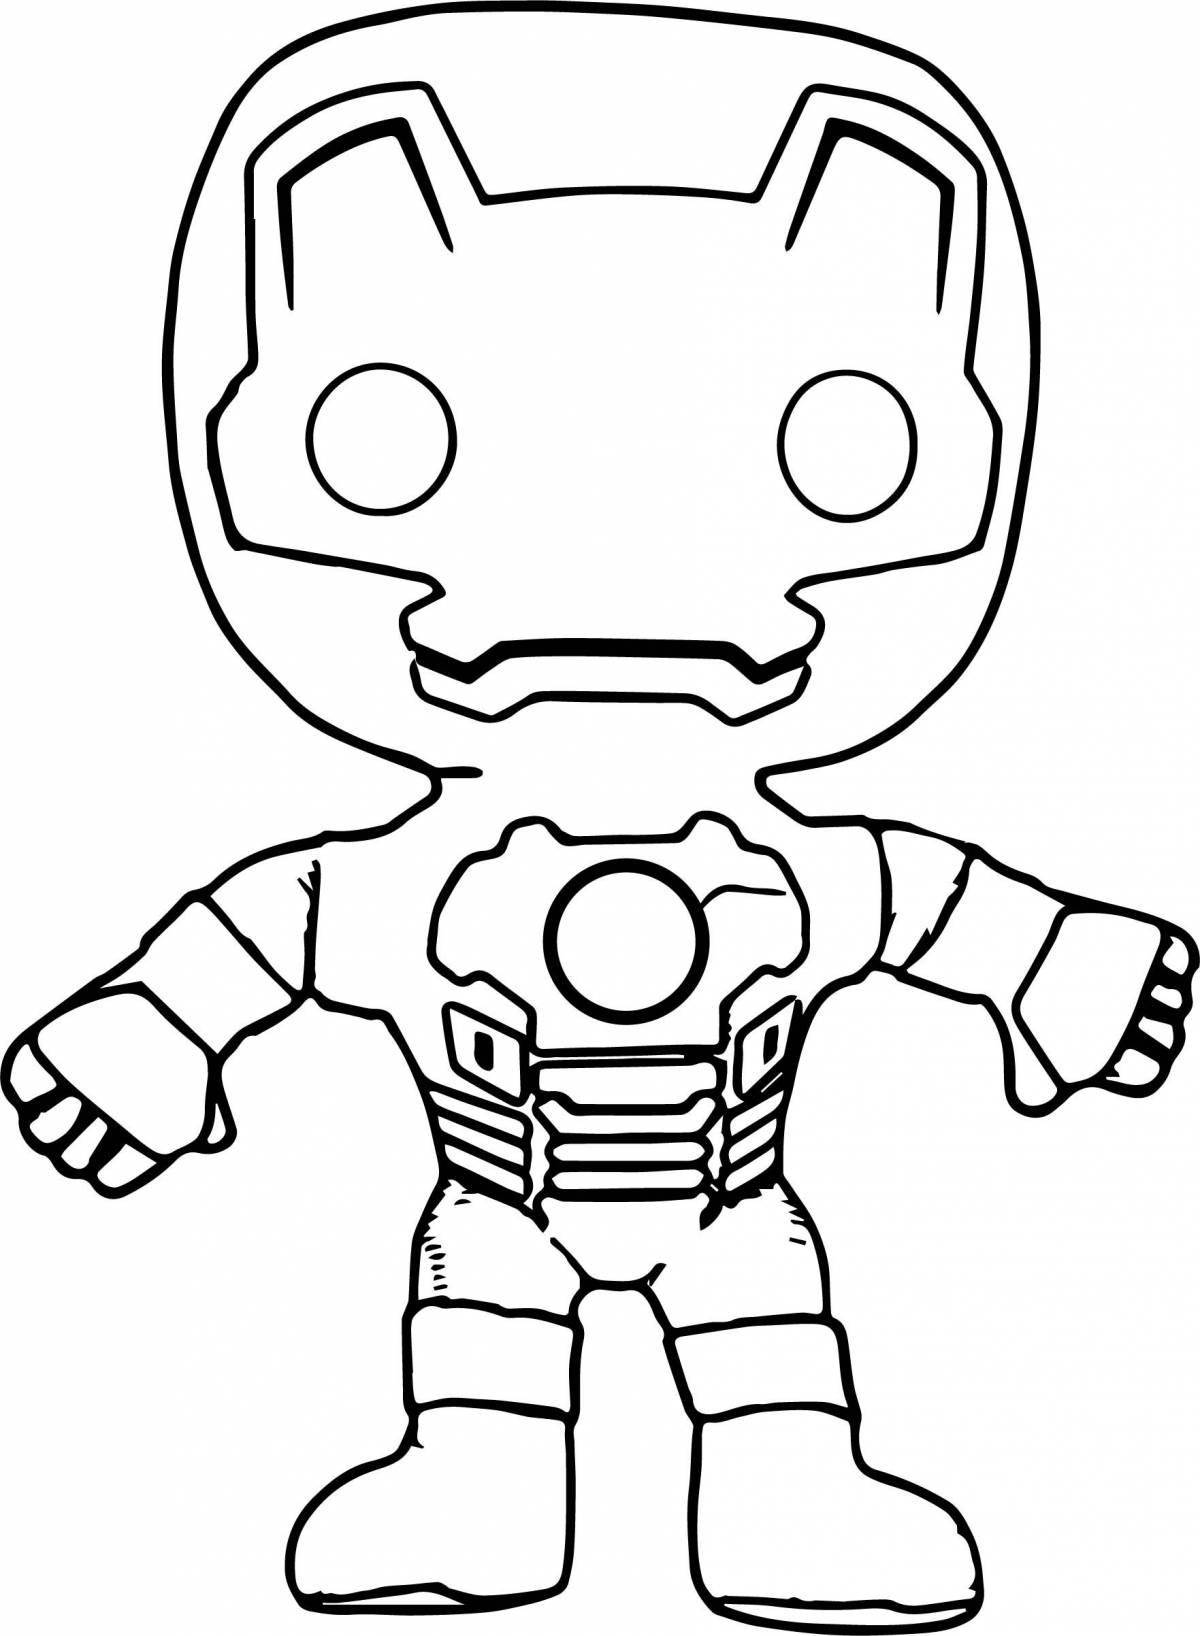 Fat iron man coloring pages for kids